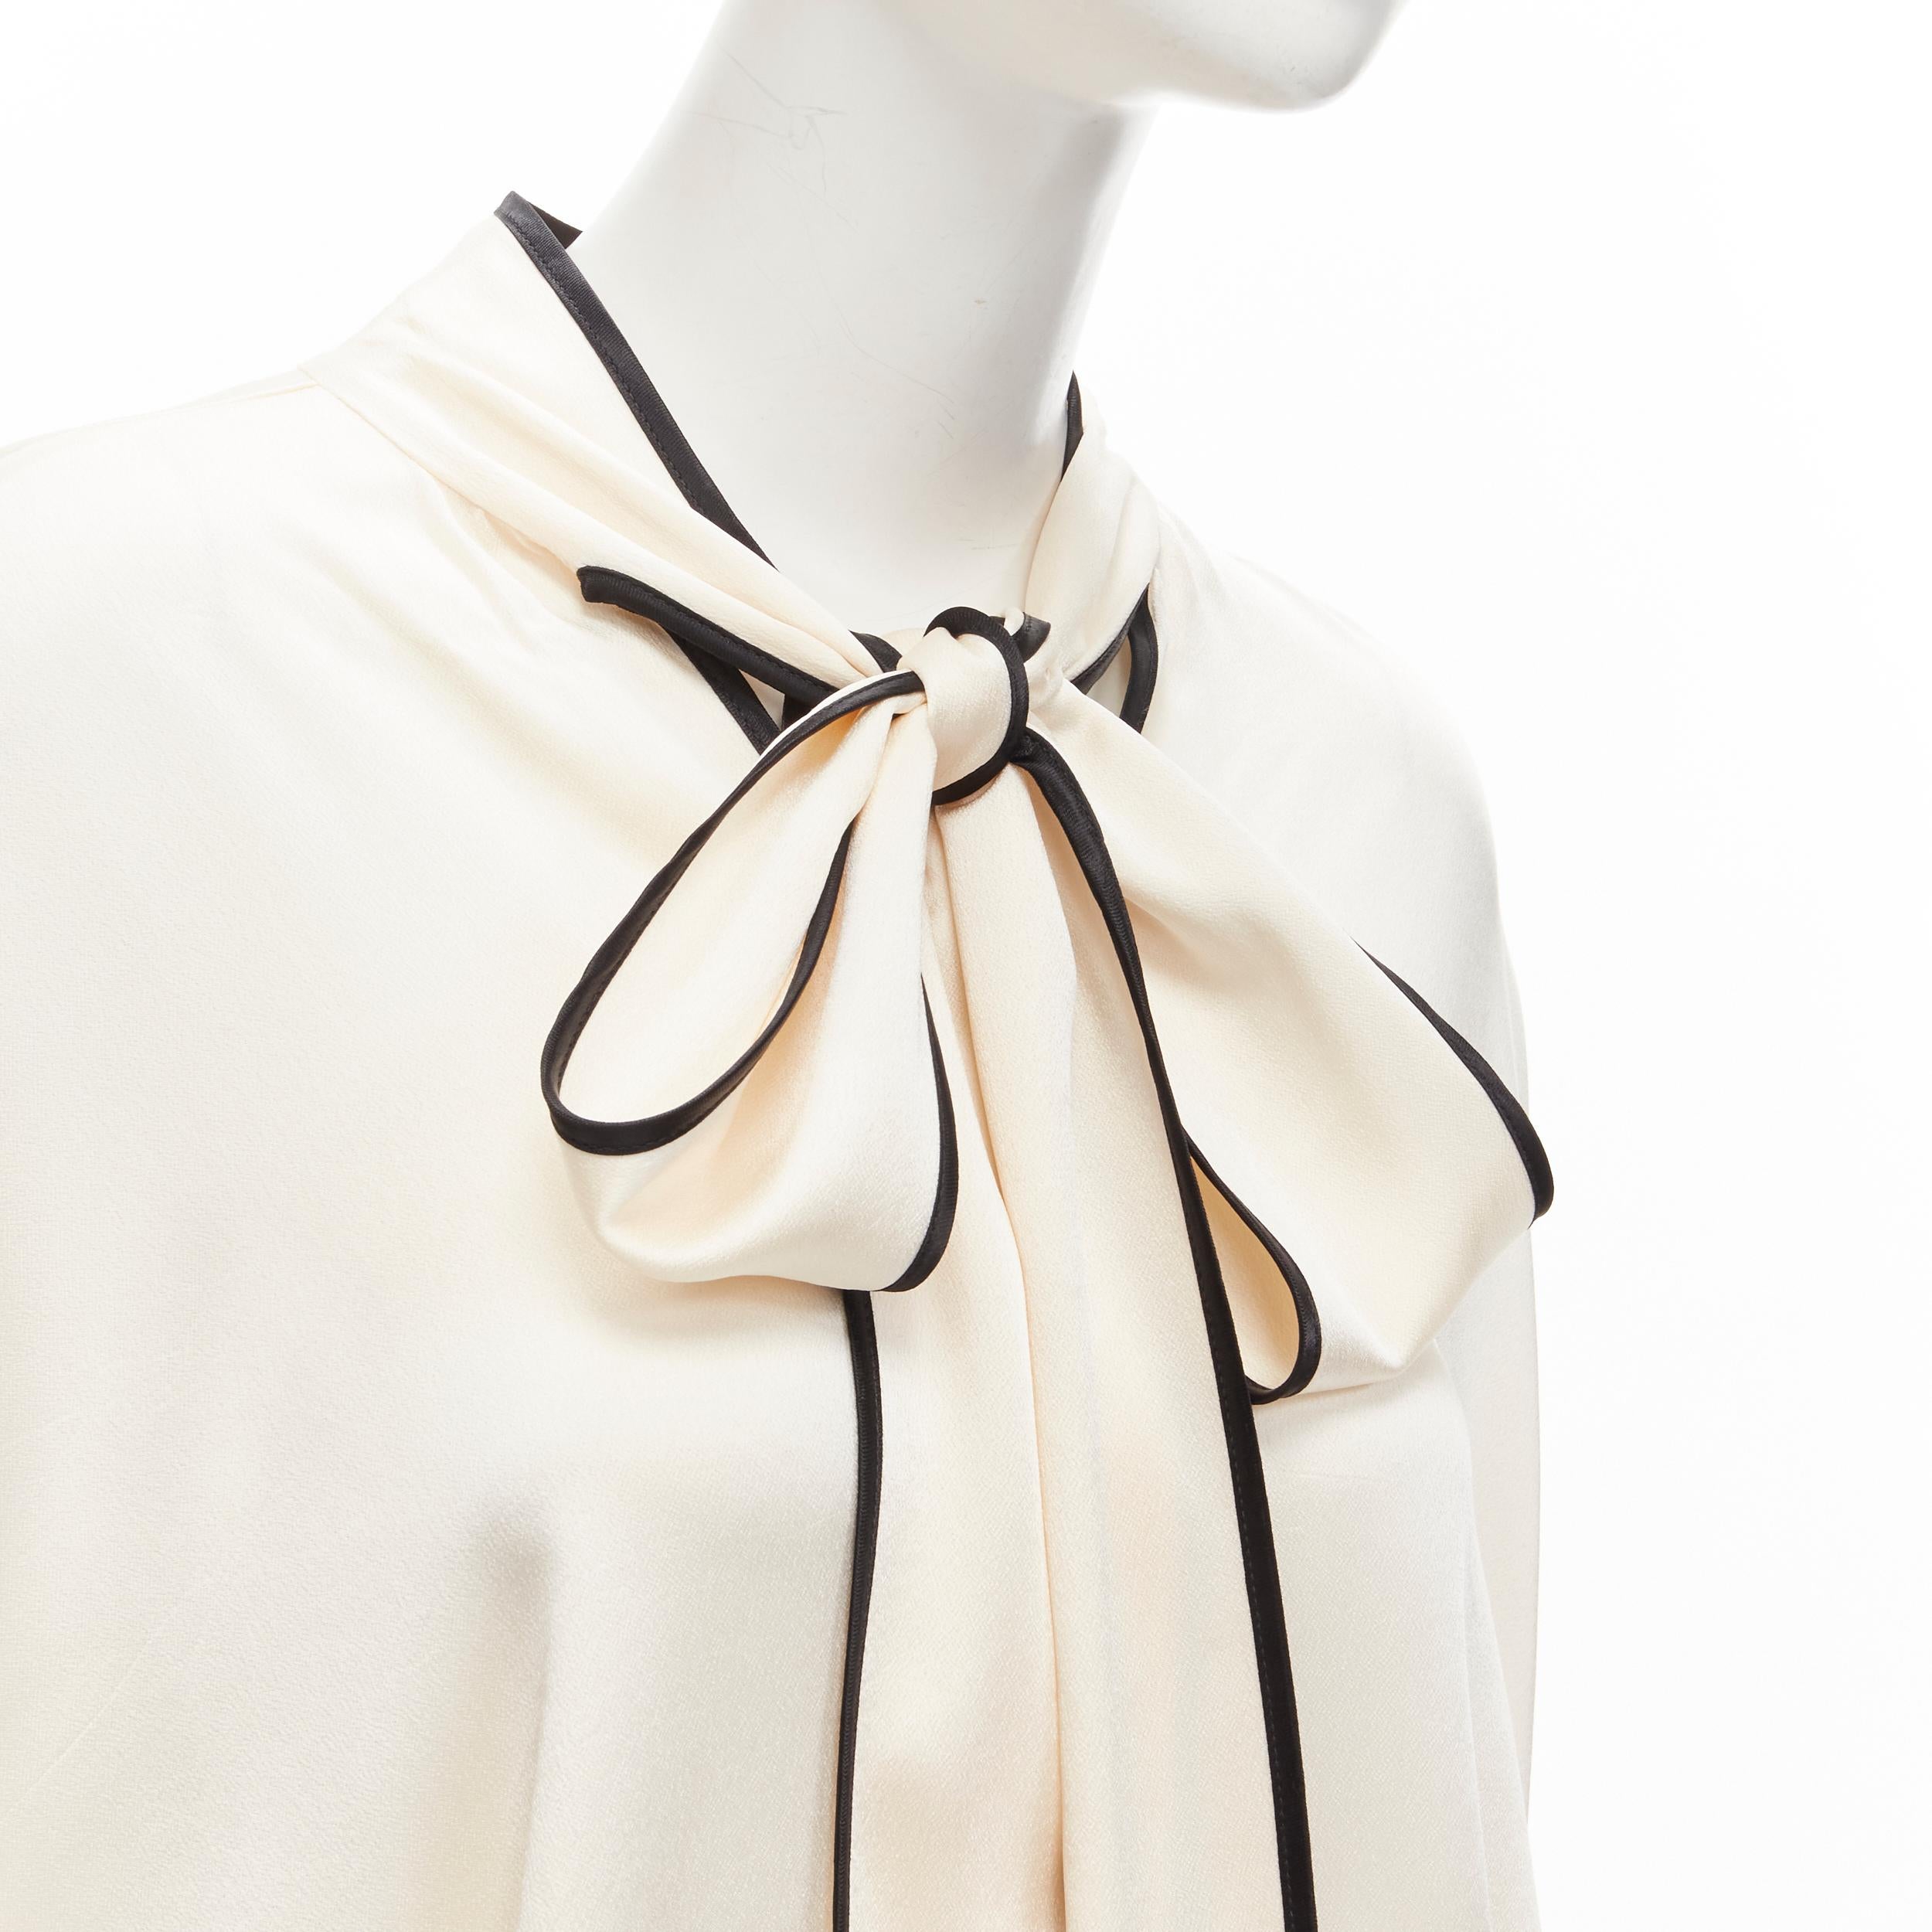 FRS FOR RESTLESS SLEEPERS cream crepe satin bow tie relaxed pajama blouse M
Reference: YNWG/A00124
Brand: For Restless Sleepers
Material: Acetate, Blend
Color: Cream, Black
Pattern: Solid
Closure: Tie Neck
Extra Details: Fabric wrap buttons on